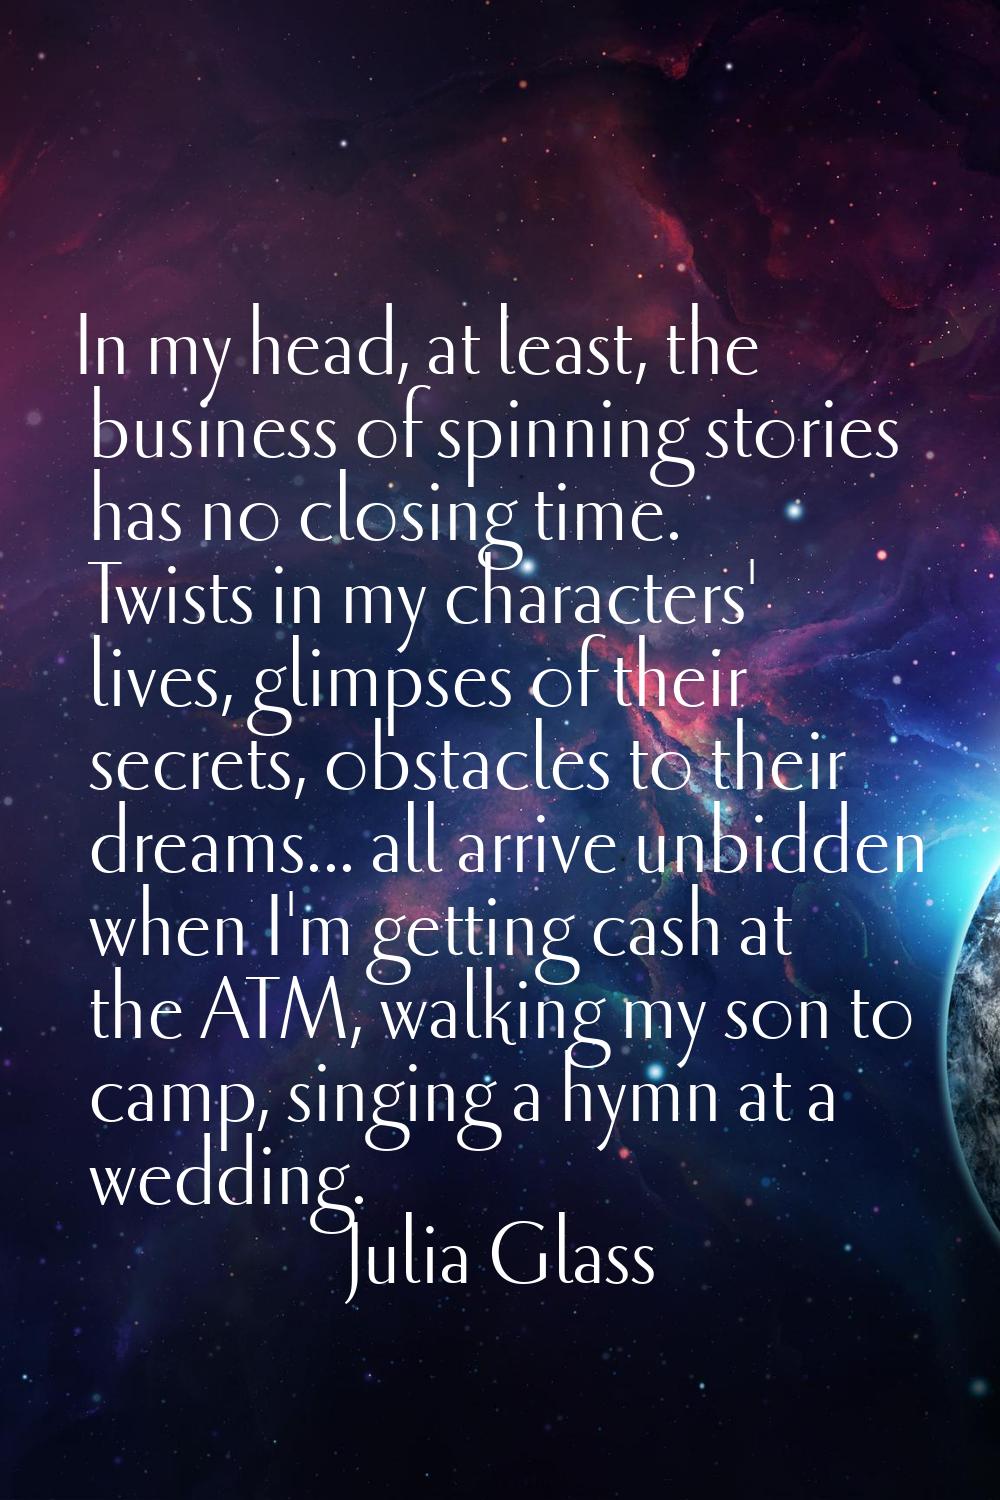 In my head, at least, the business of spinning stories has no closing time. Twists in my characters